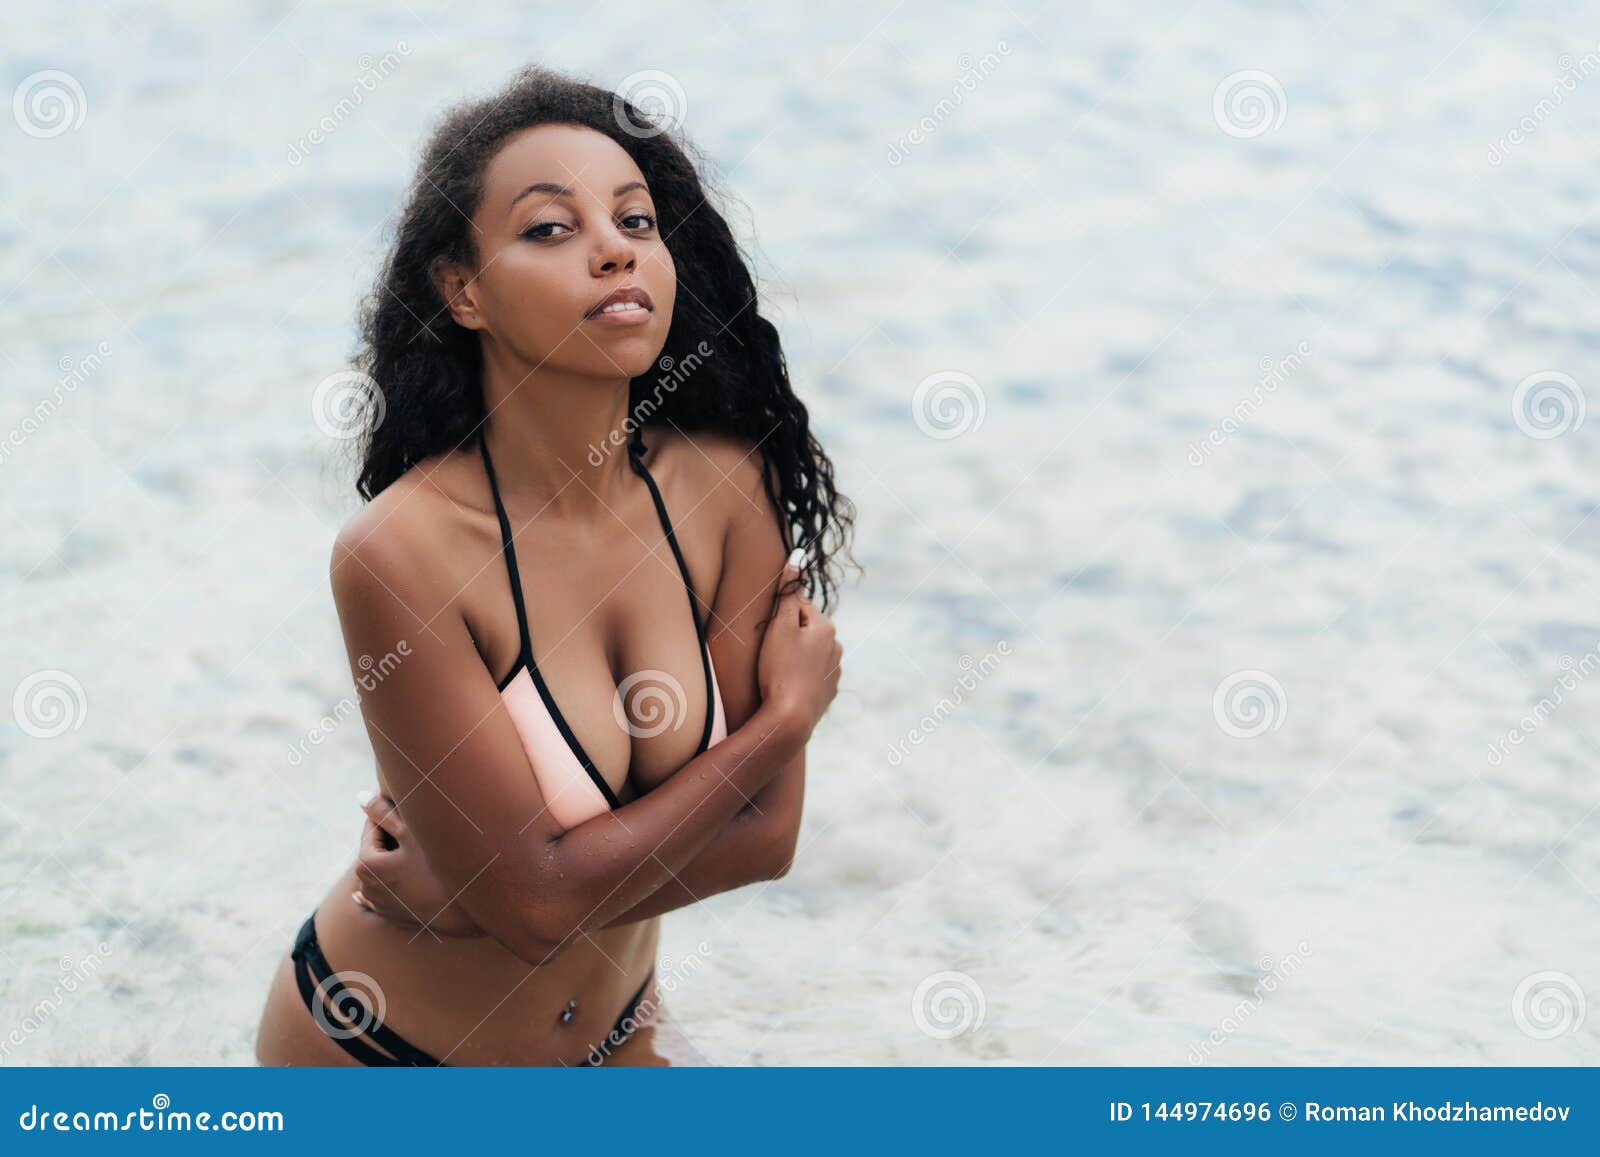 Portrait of Dark Skinned Afro American Girl with Big Breasts on Beach photo photo